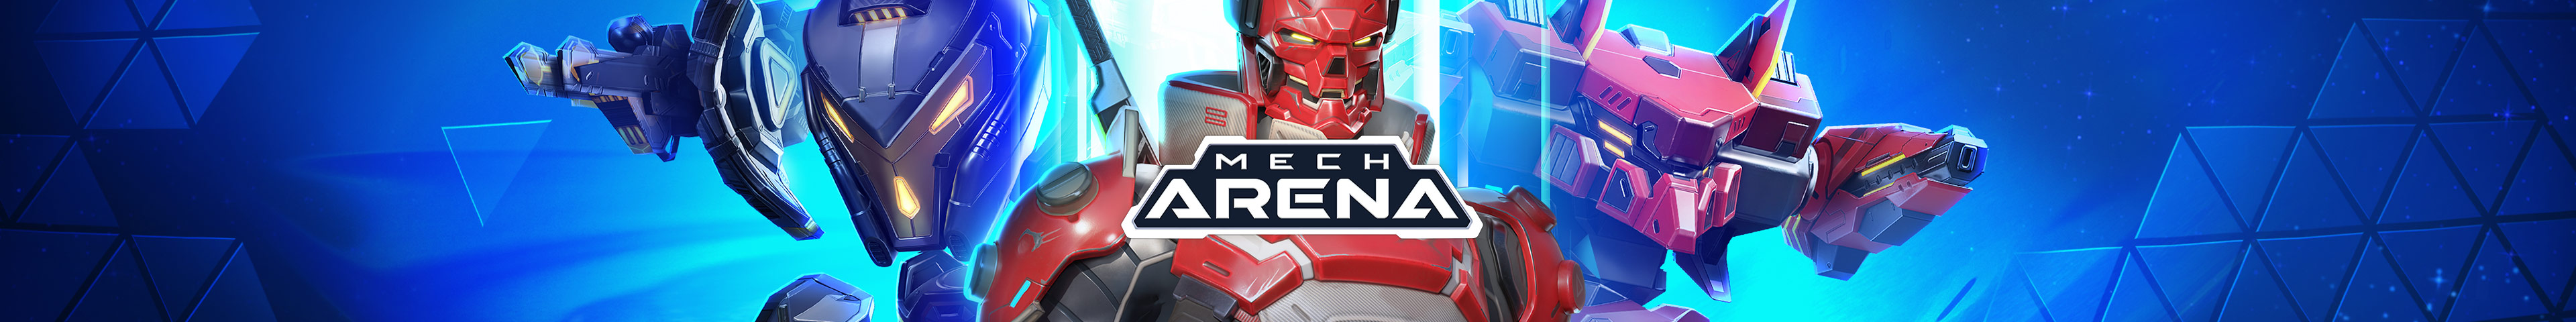 The downfall of Mech Arena